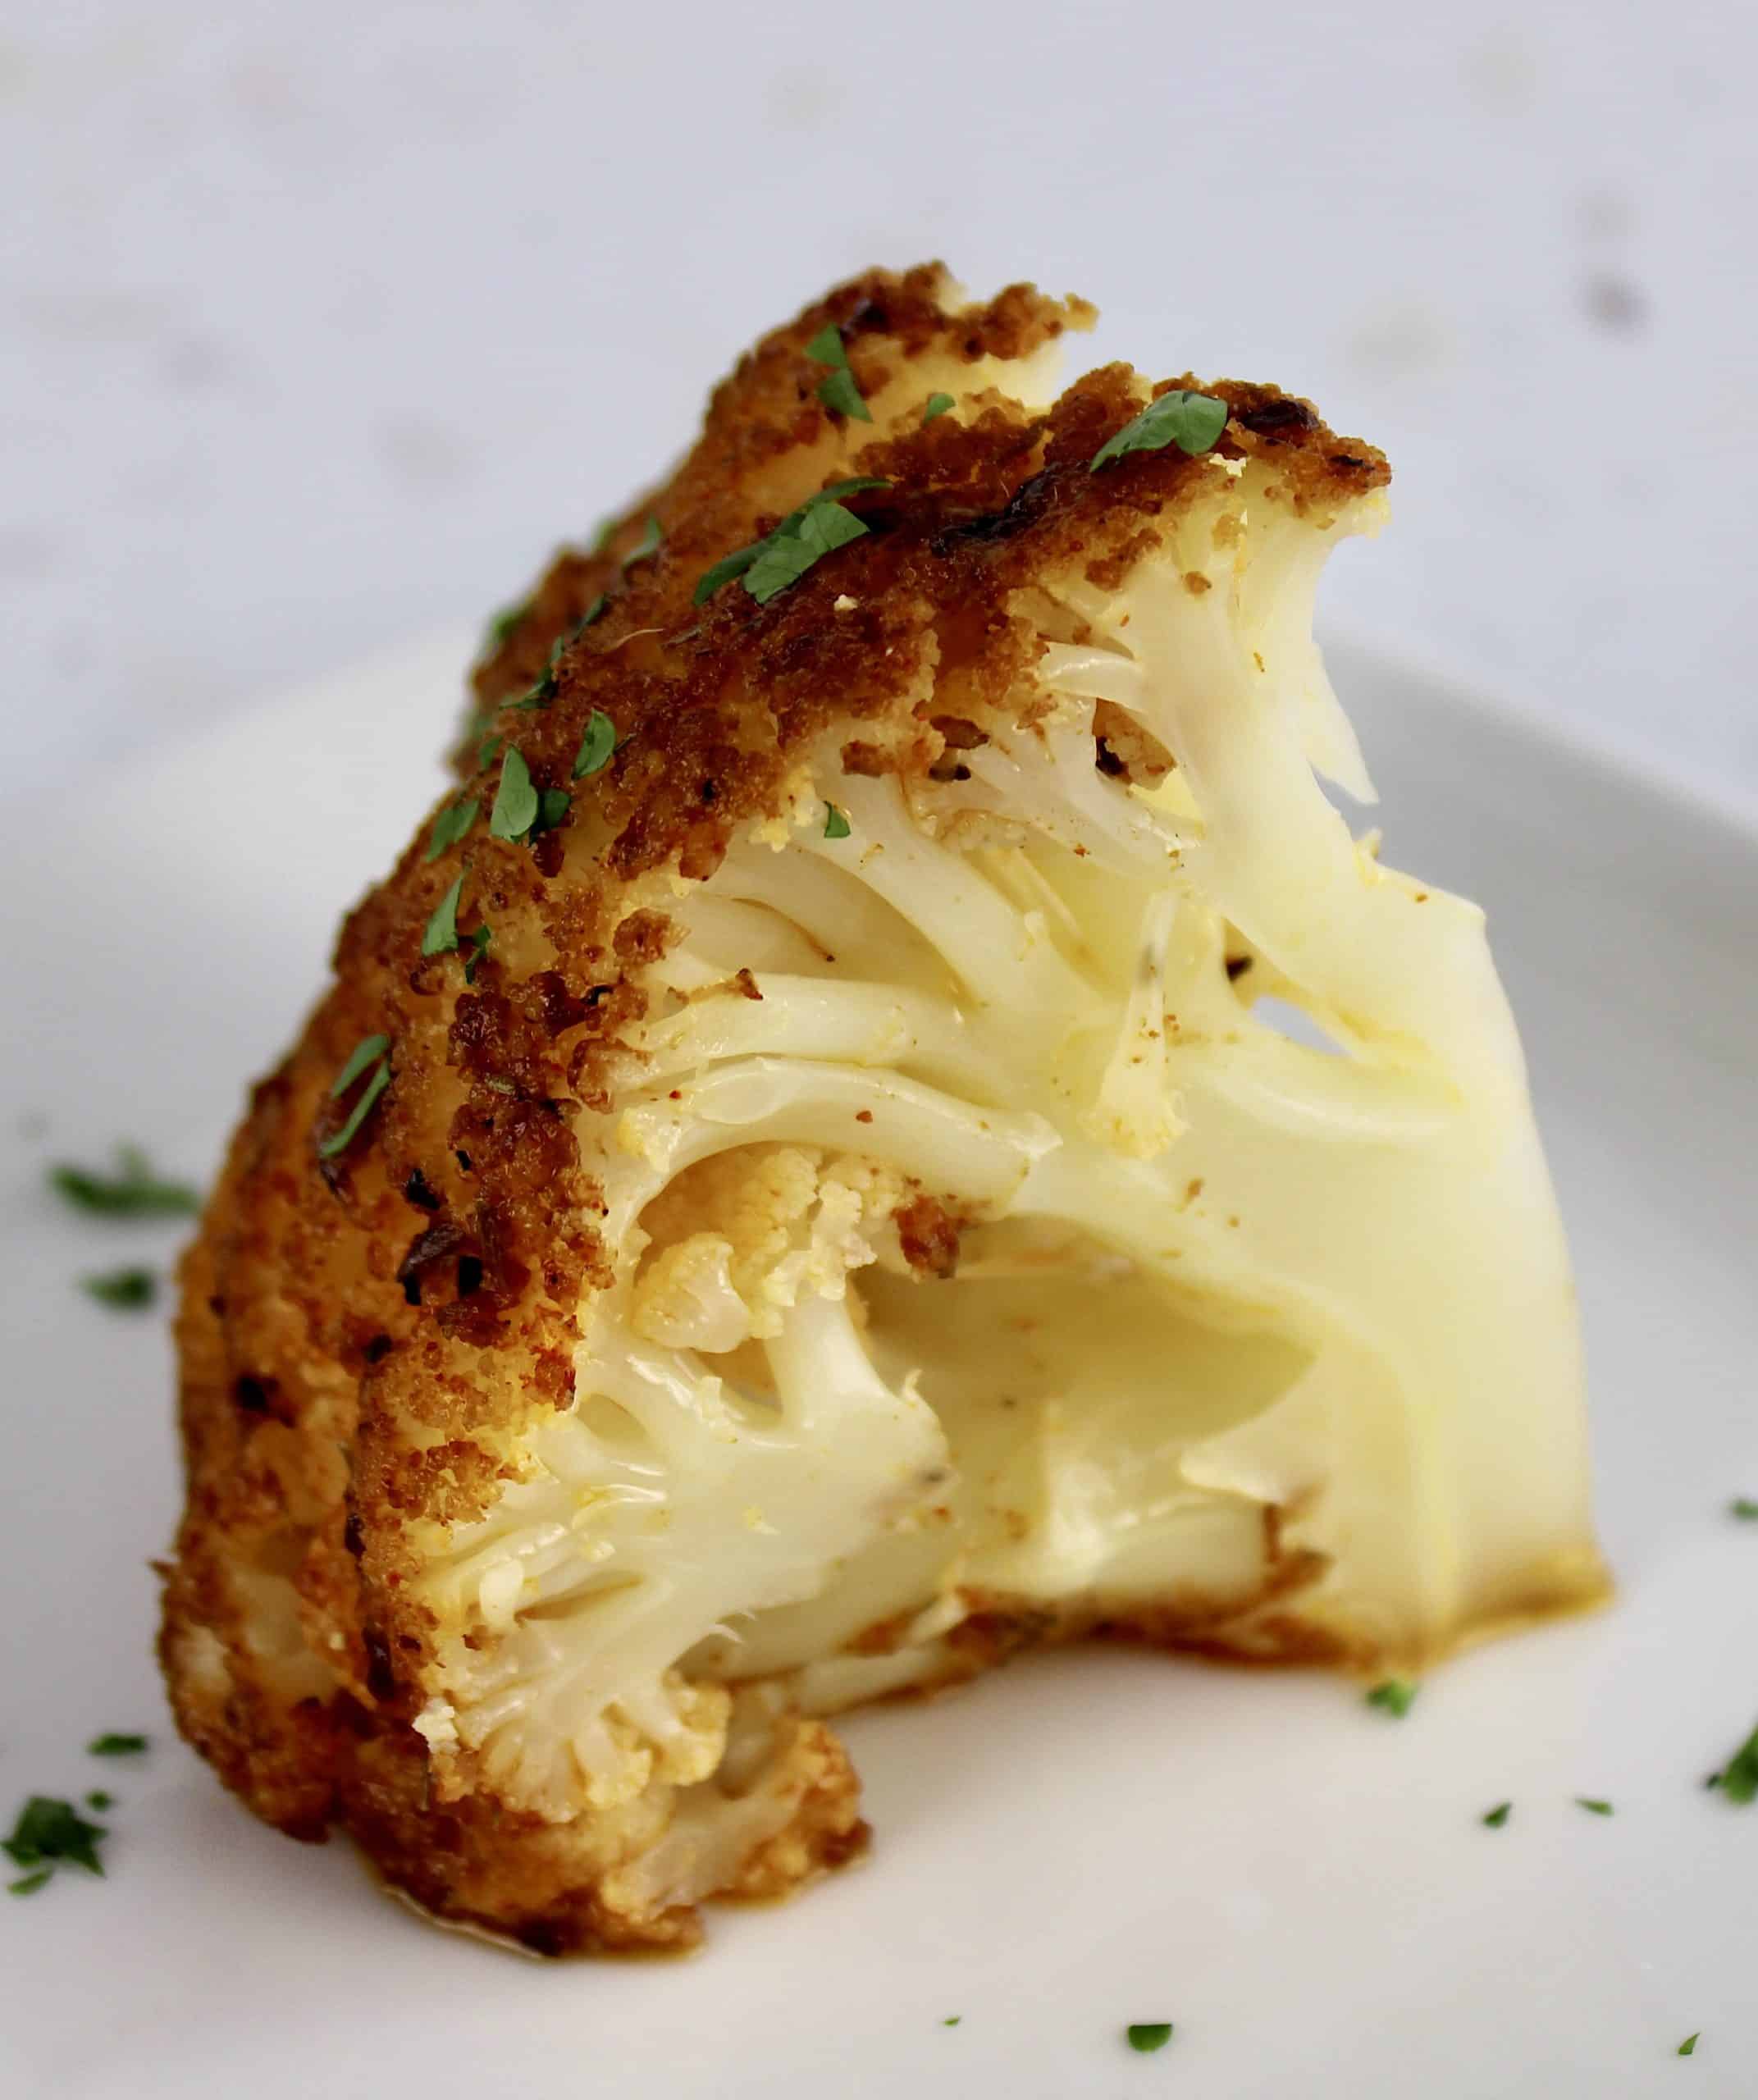 wedge of Whole Roasted Cauliflower on white plate with parsley